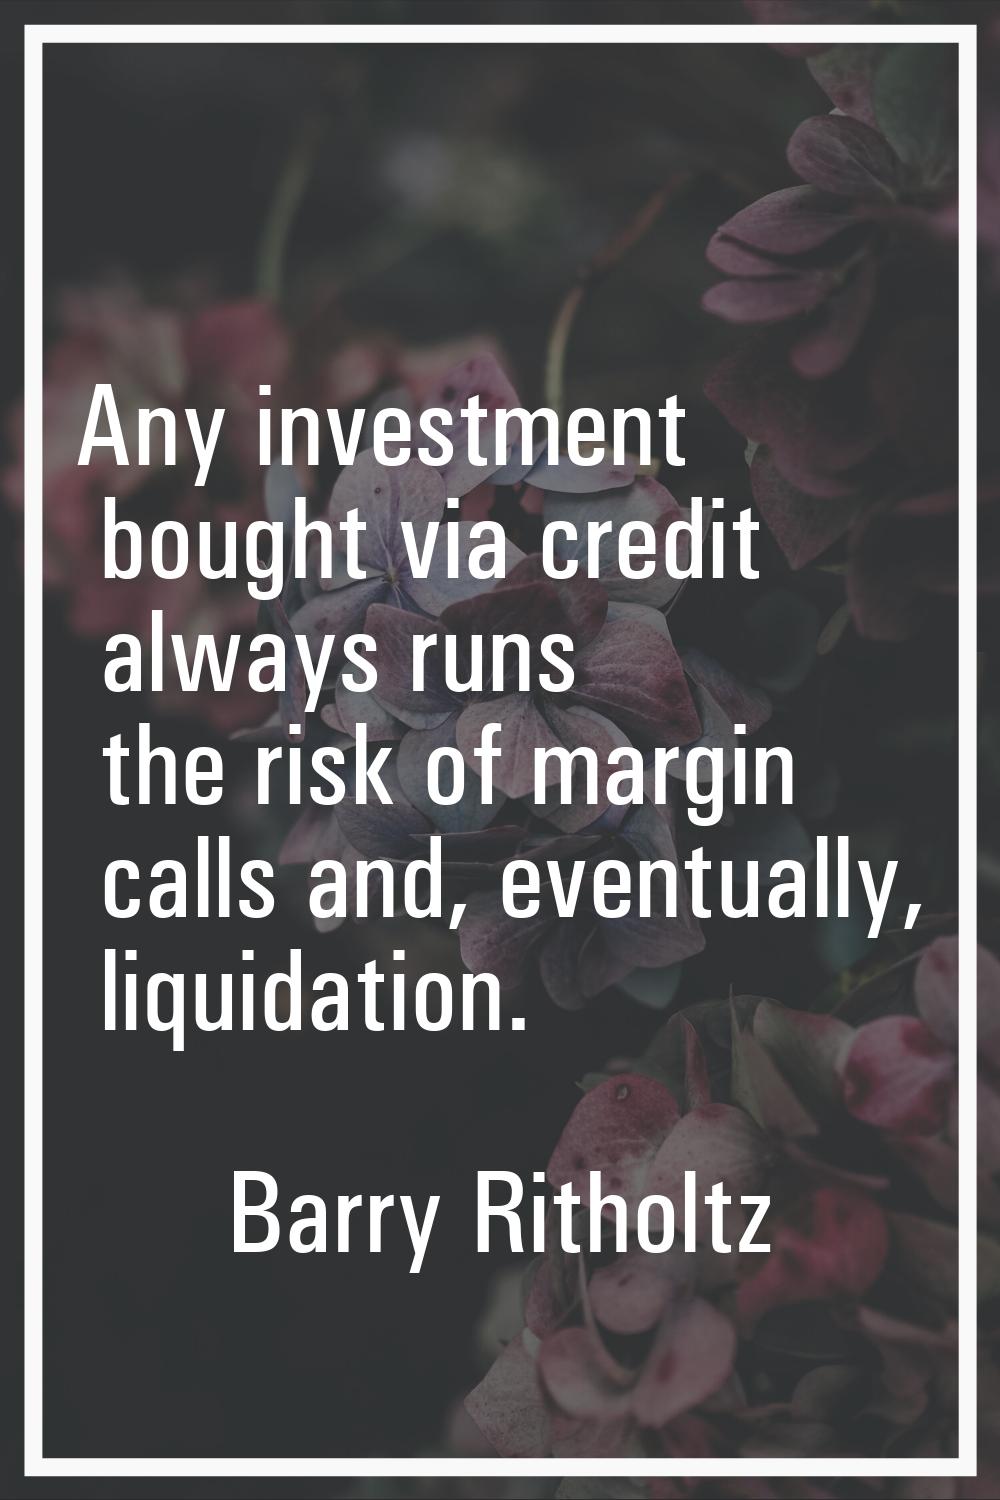 Any investment bought via credit always runs the risk of margin calls and, eventually, liquidation.